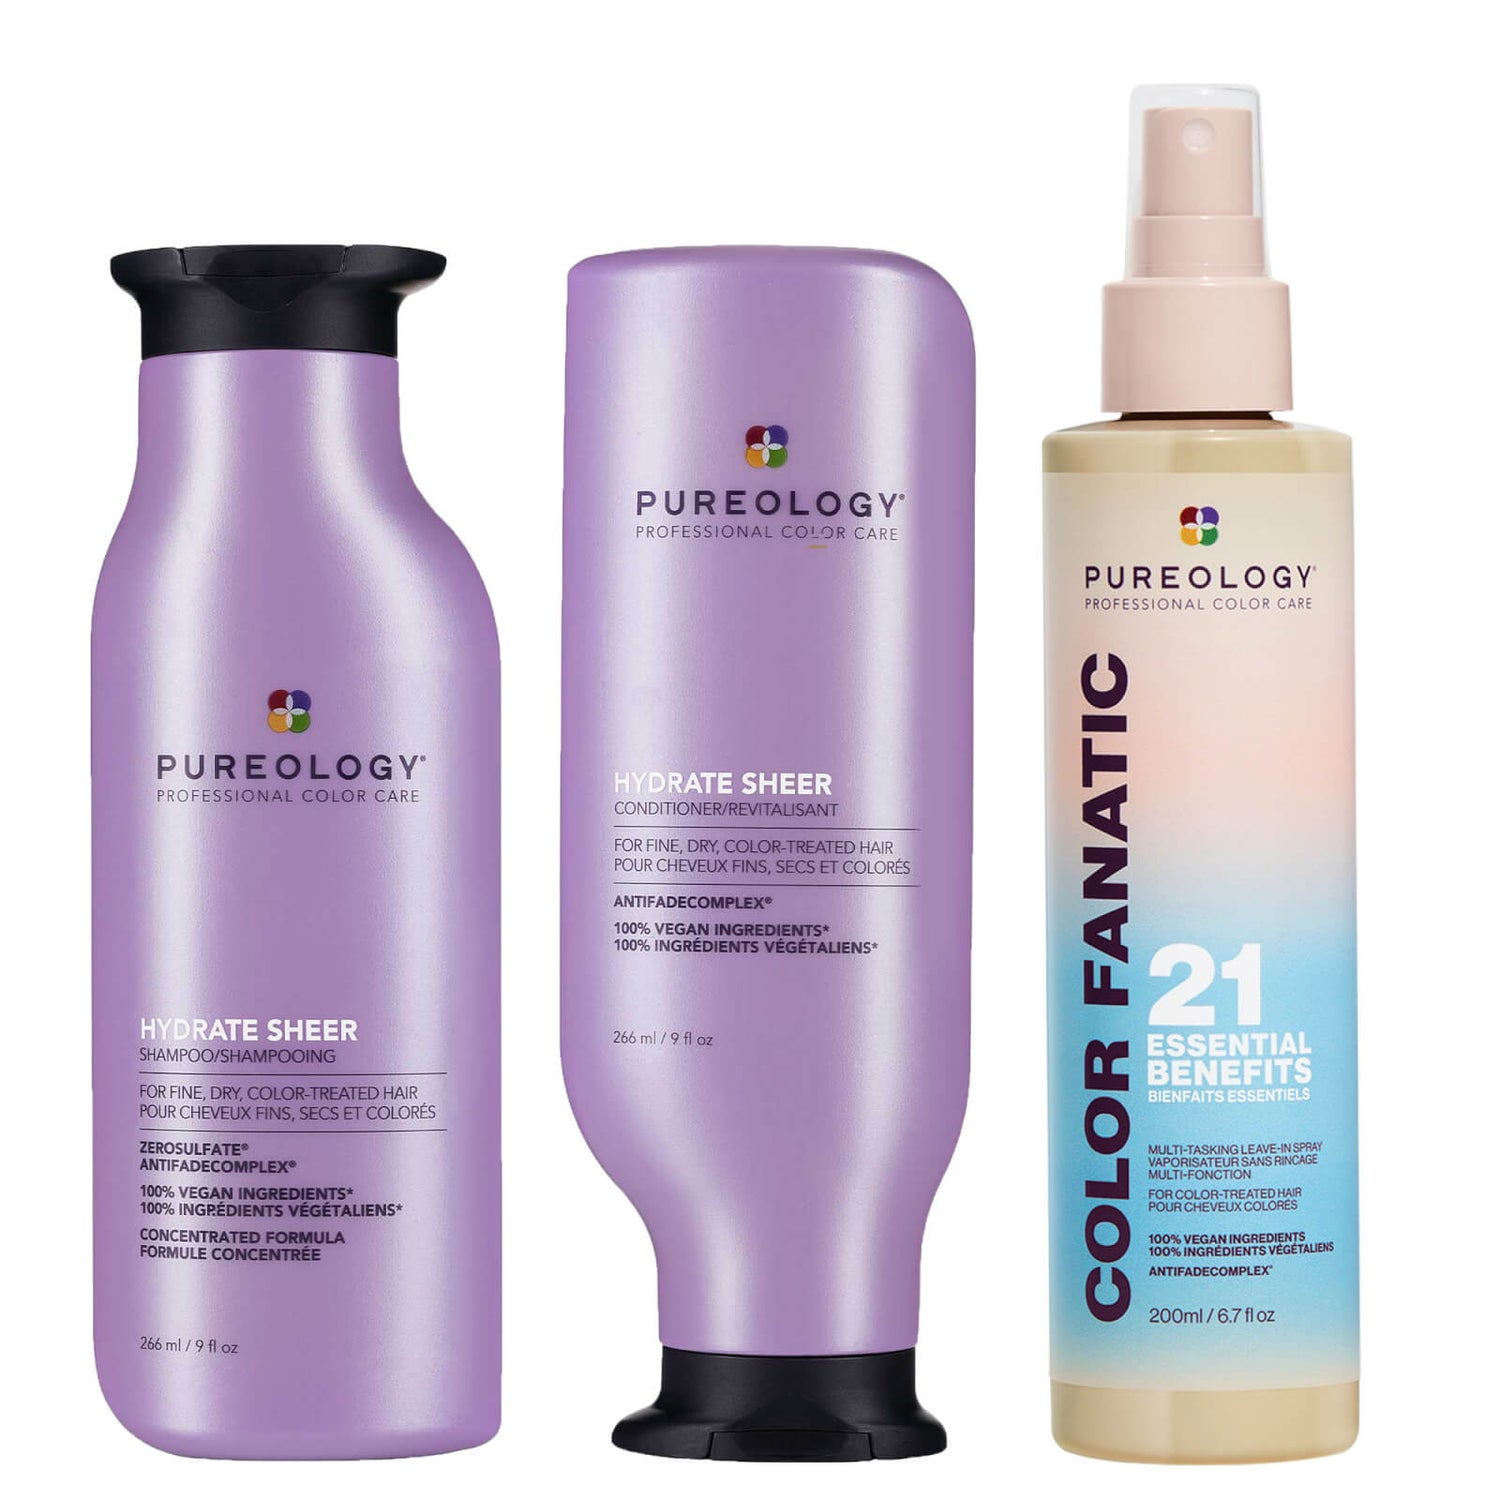 Pureology Hydrate Sheer Shampoo, Conditioner and Color Fanatic Spray ...